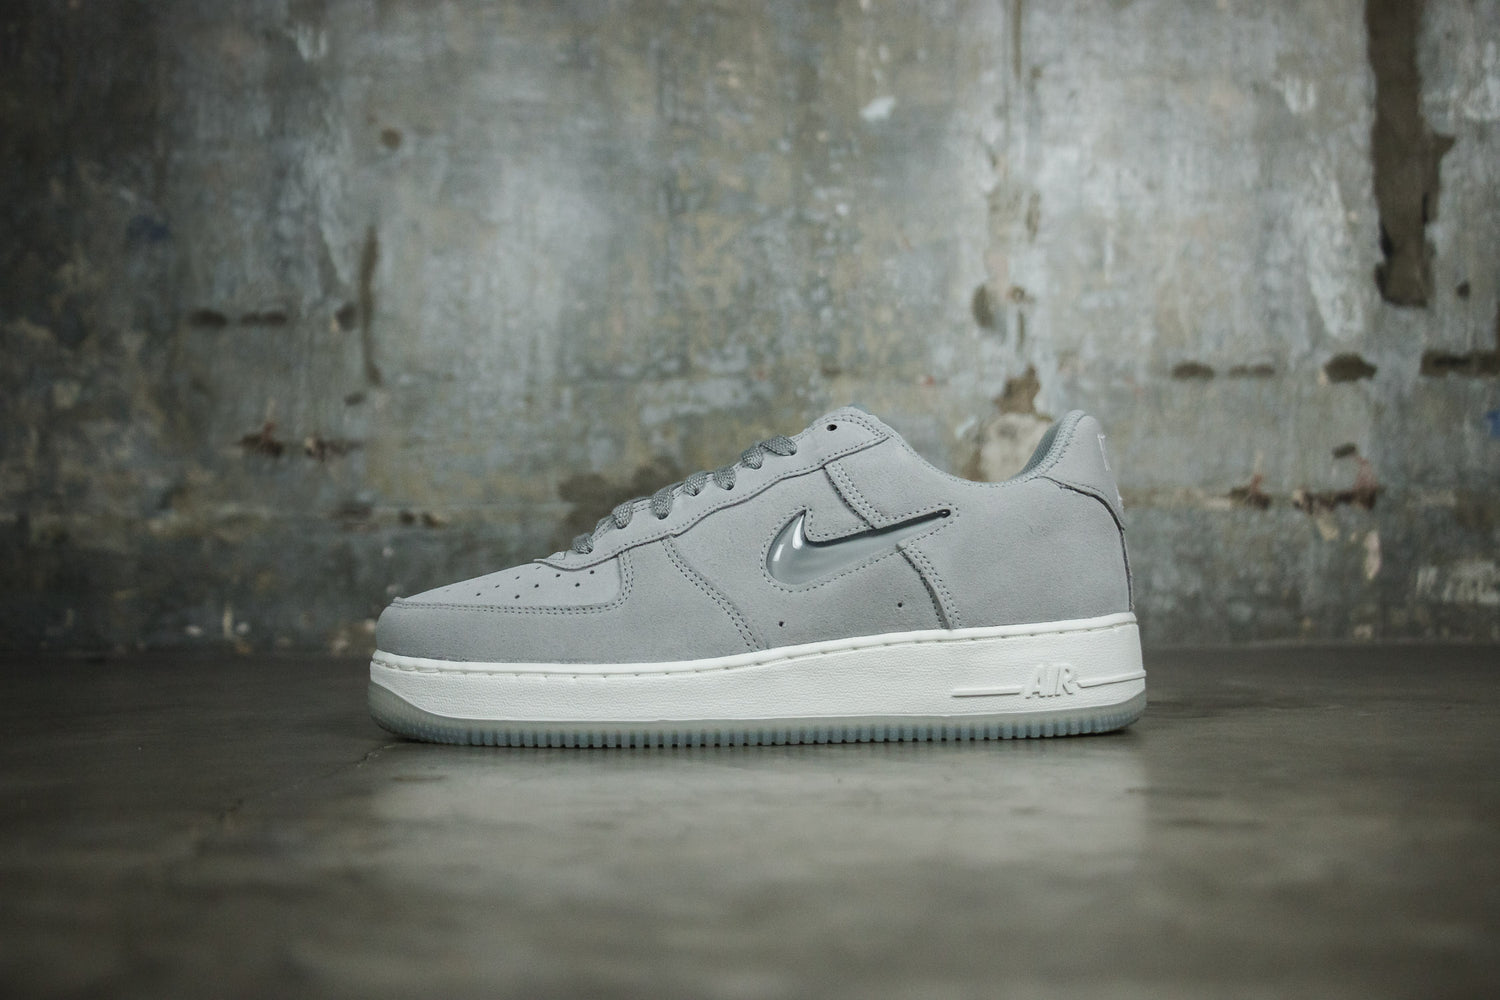 Nike Air Force 1 '07 Low Color Of The Month Jewel Light Smoke Grey